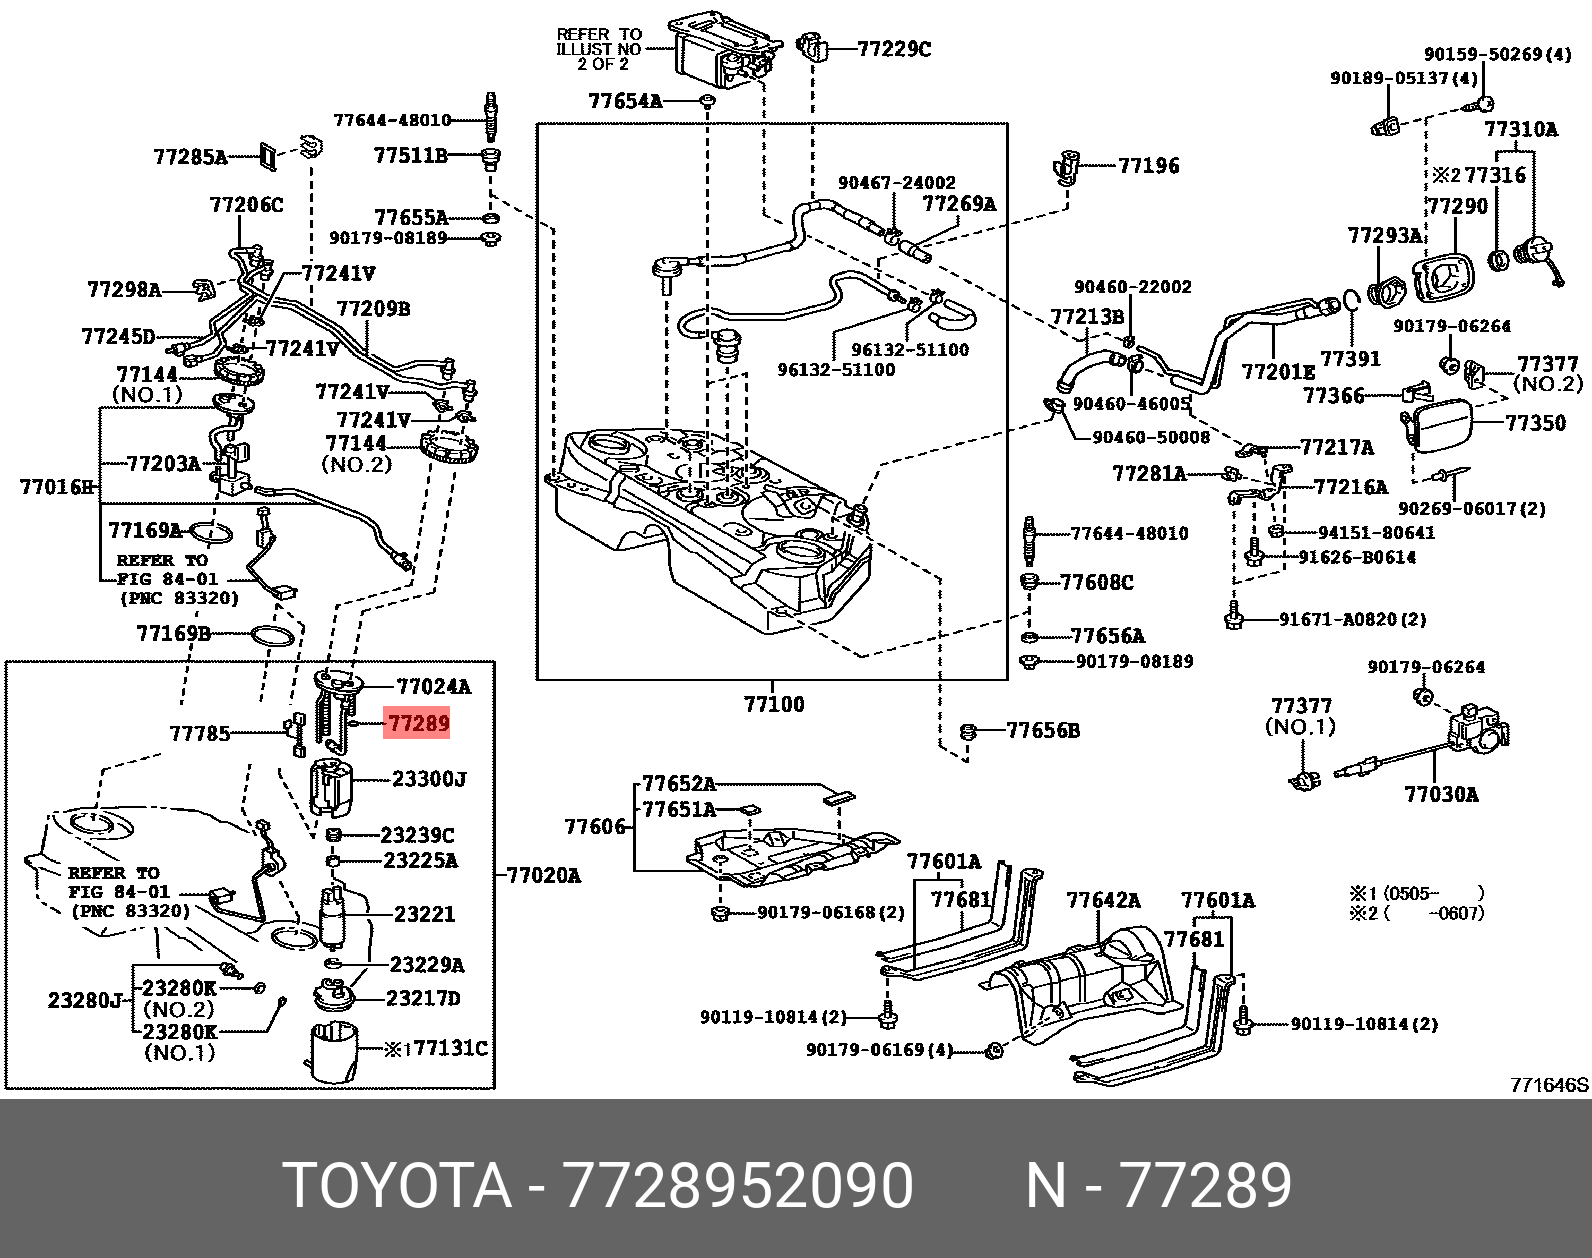 CAMRY 200601 - 201108, HOLDER, FUEL TANK PIPE SETTING